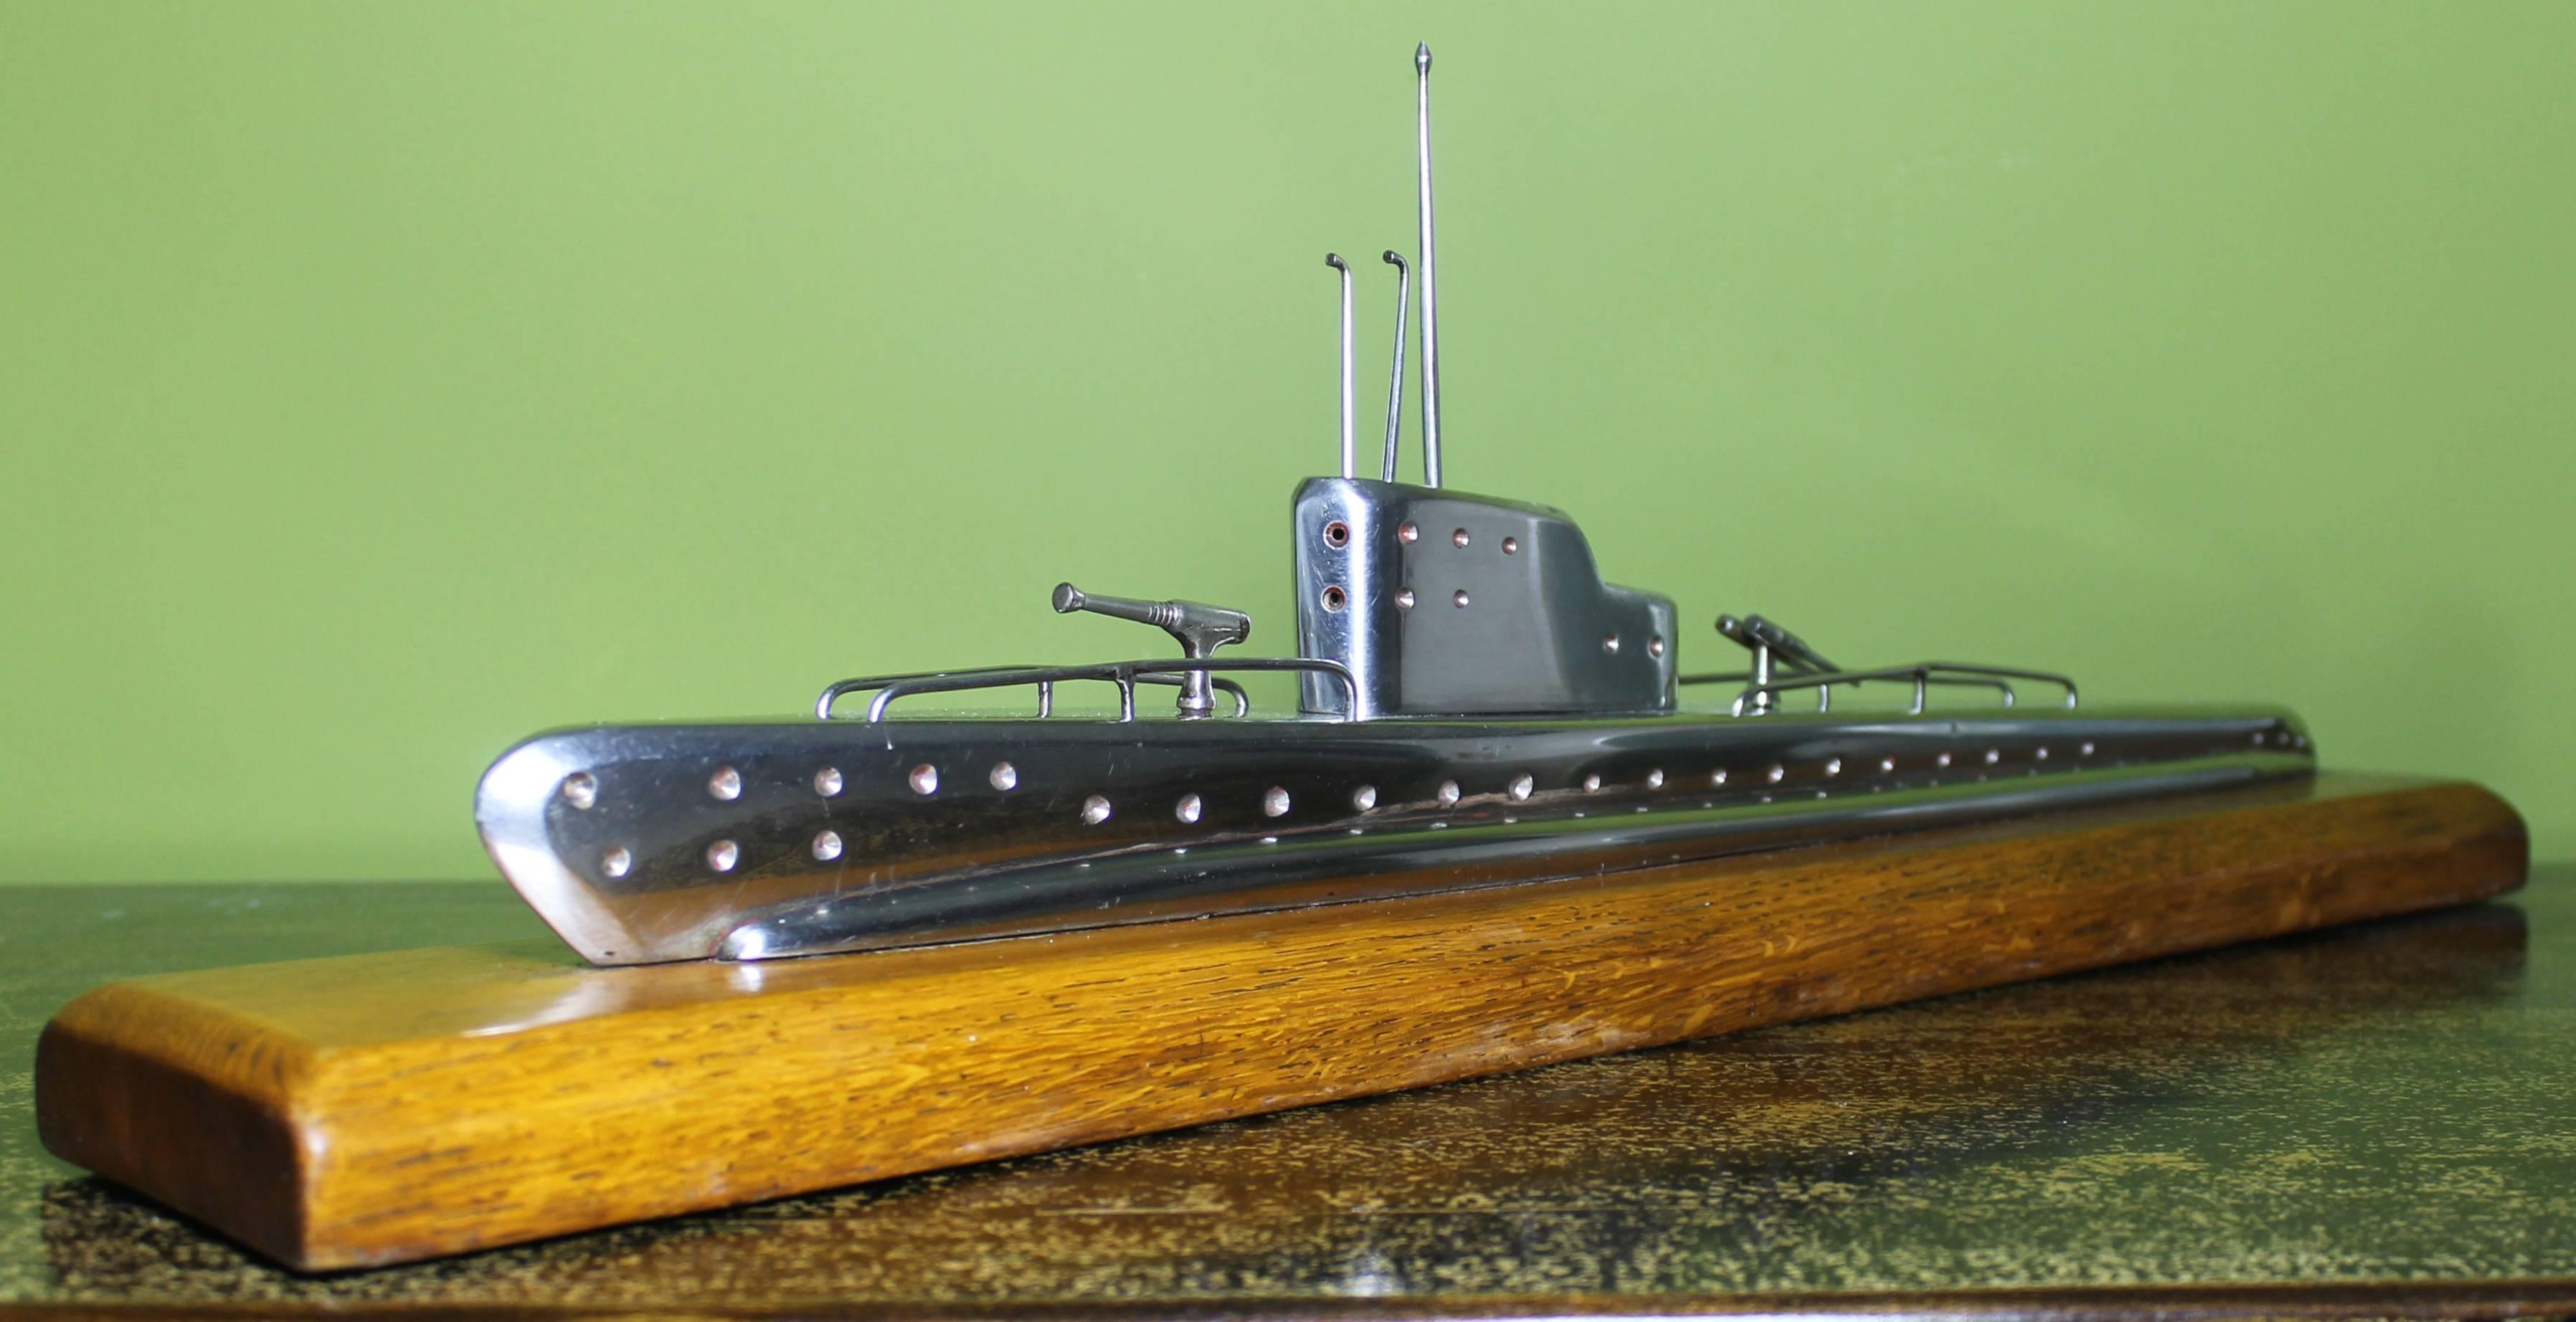 American Submarine in Stainless Steel from the 1940s